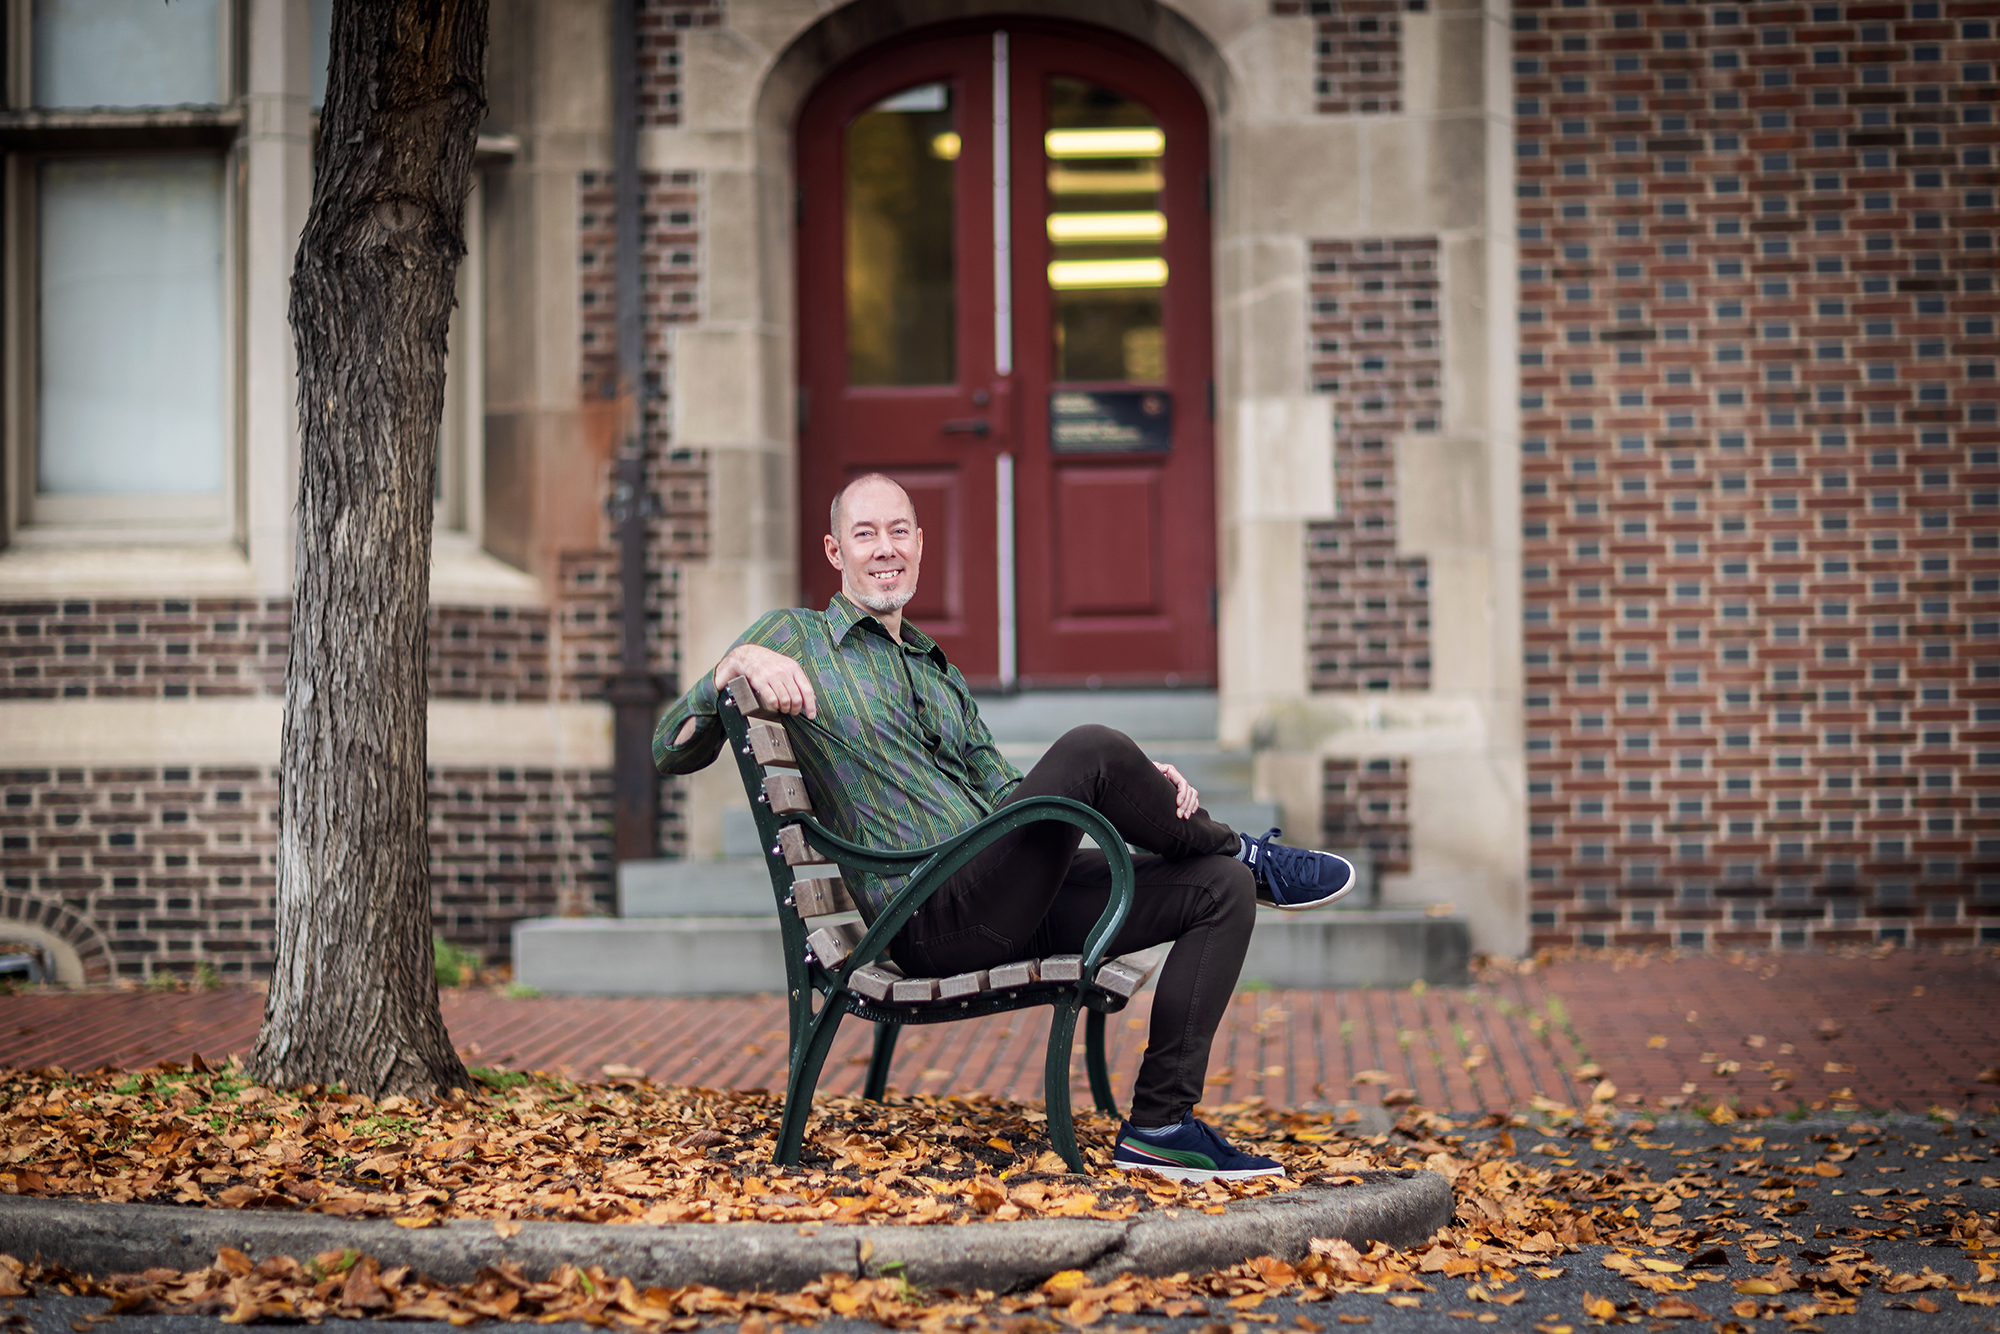 John Donges sitting on a bench in an outside courtyard